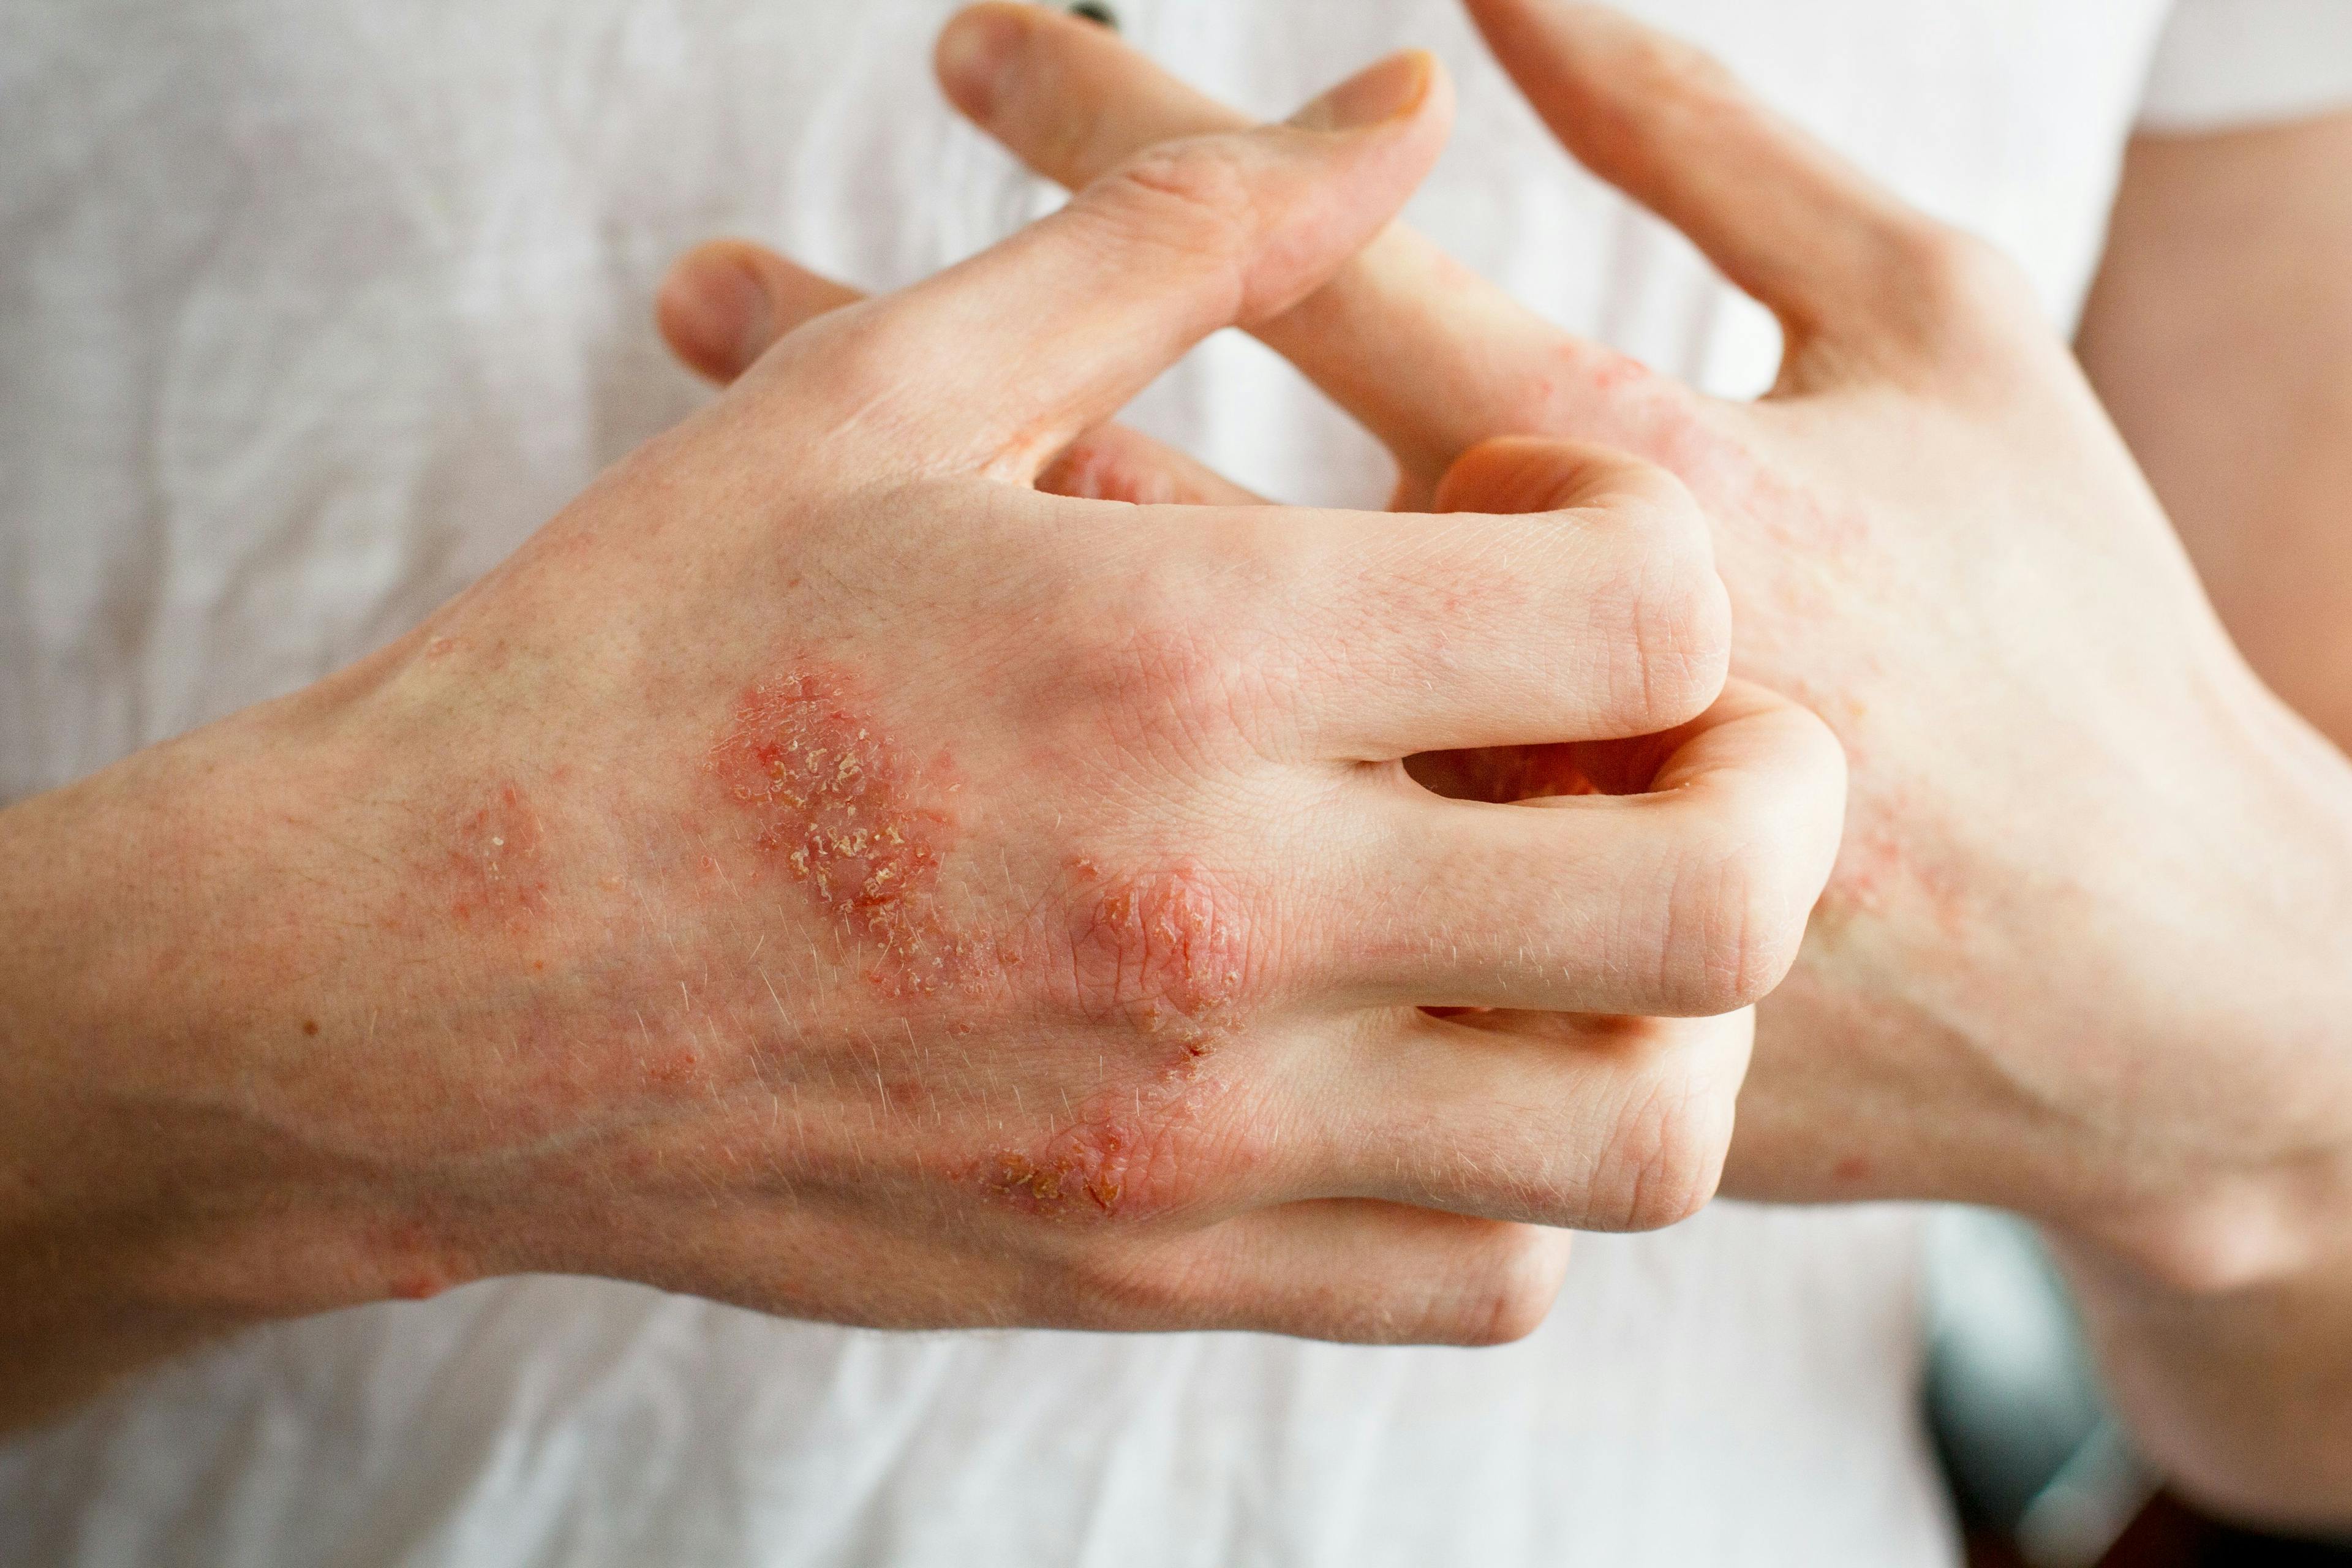 Patients With Moderate-to-Severe Atopic Dermatitis Experience Impaired QOL, Feel Disease Burden